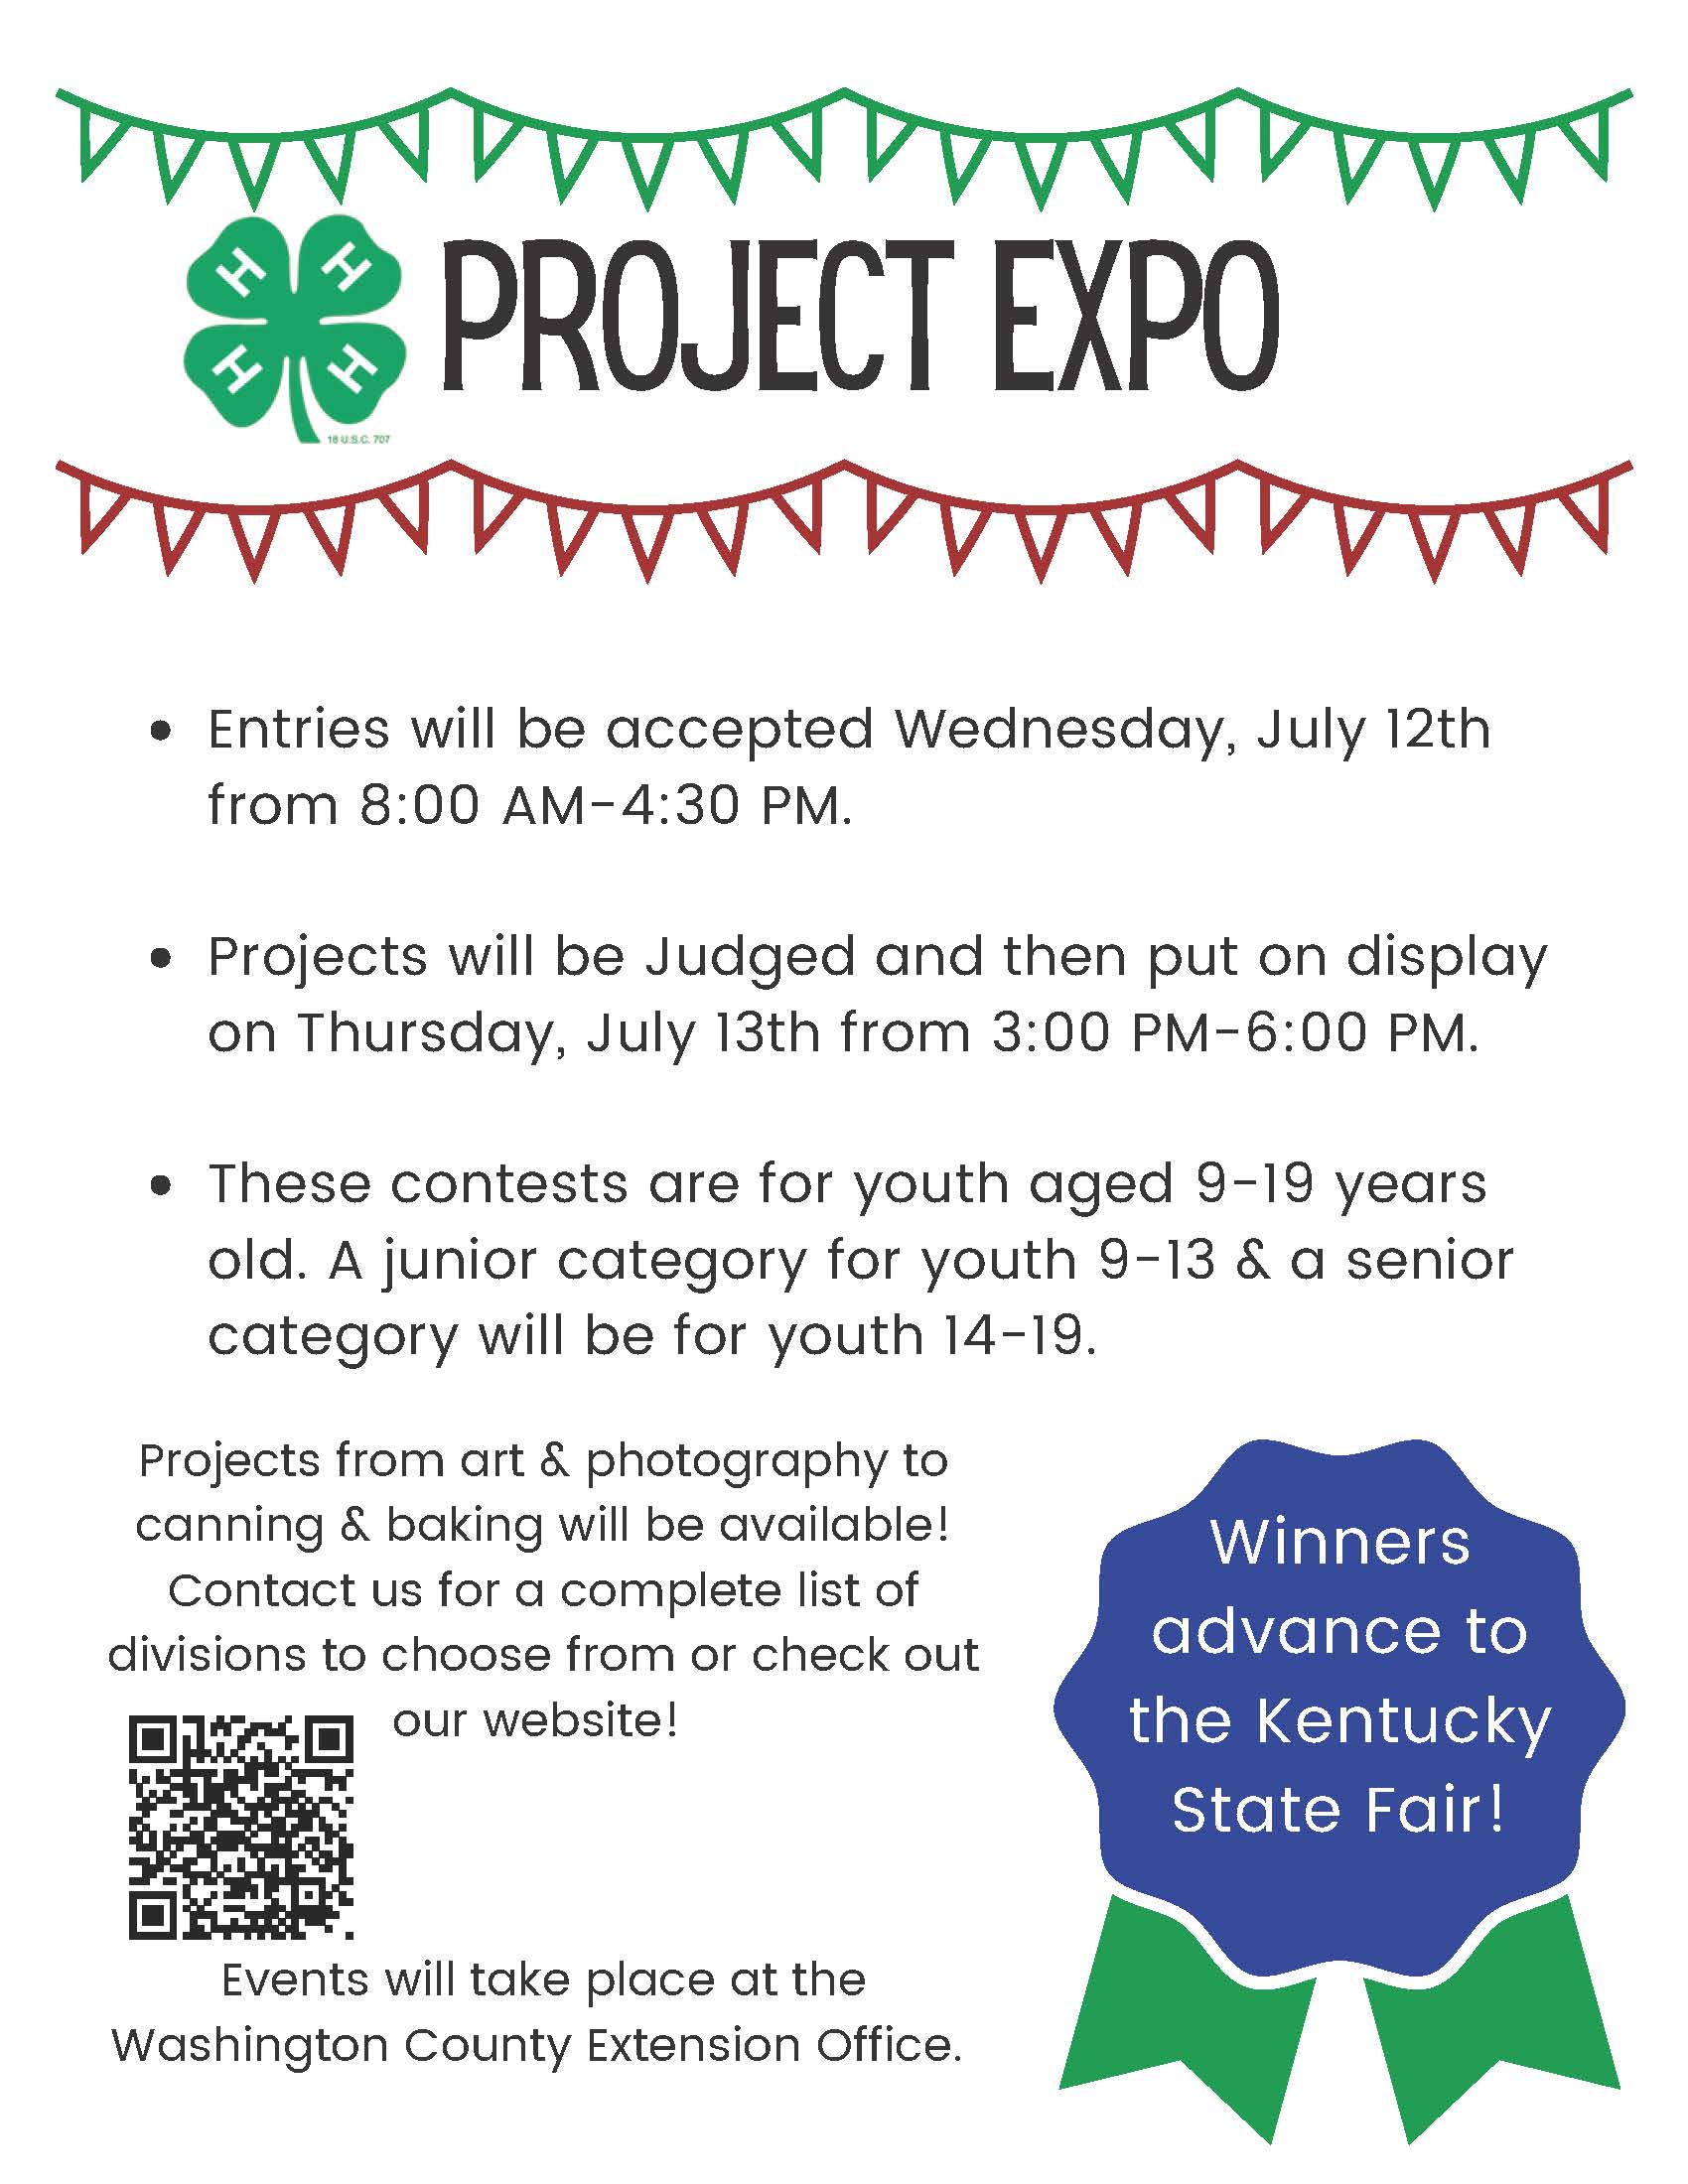 Enter your project for Kentucky State Fair Consideration!